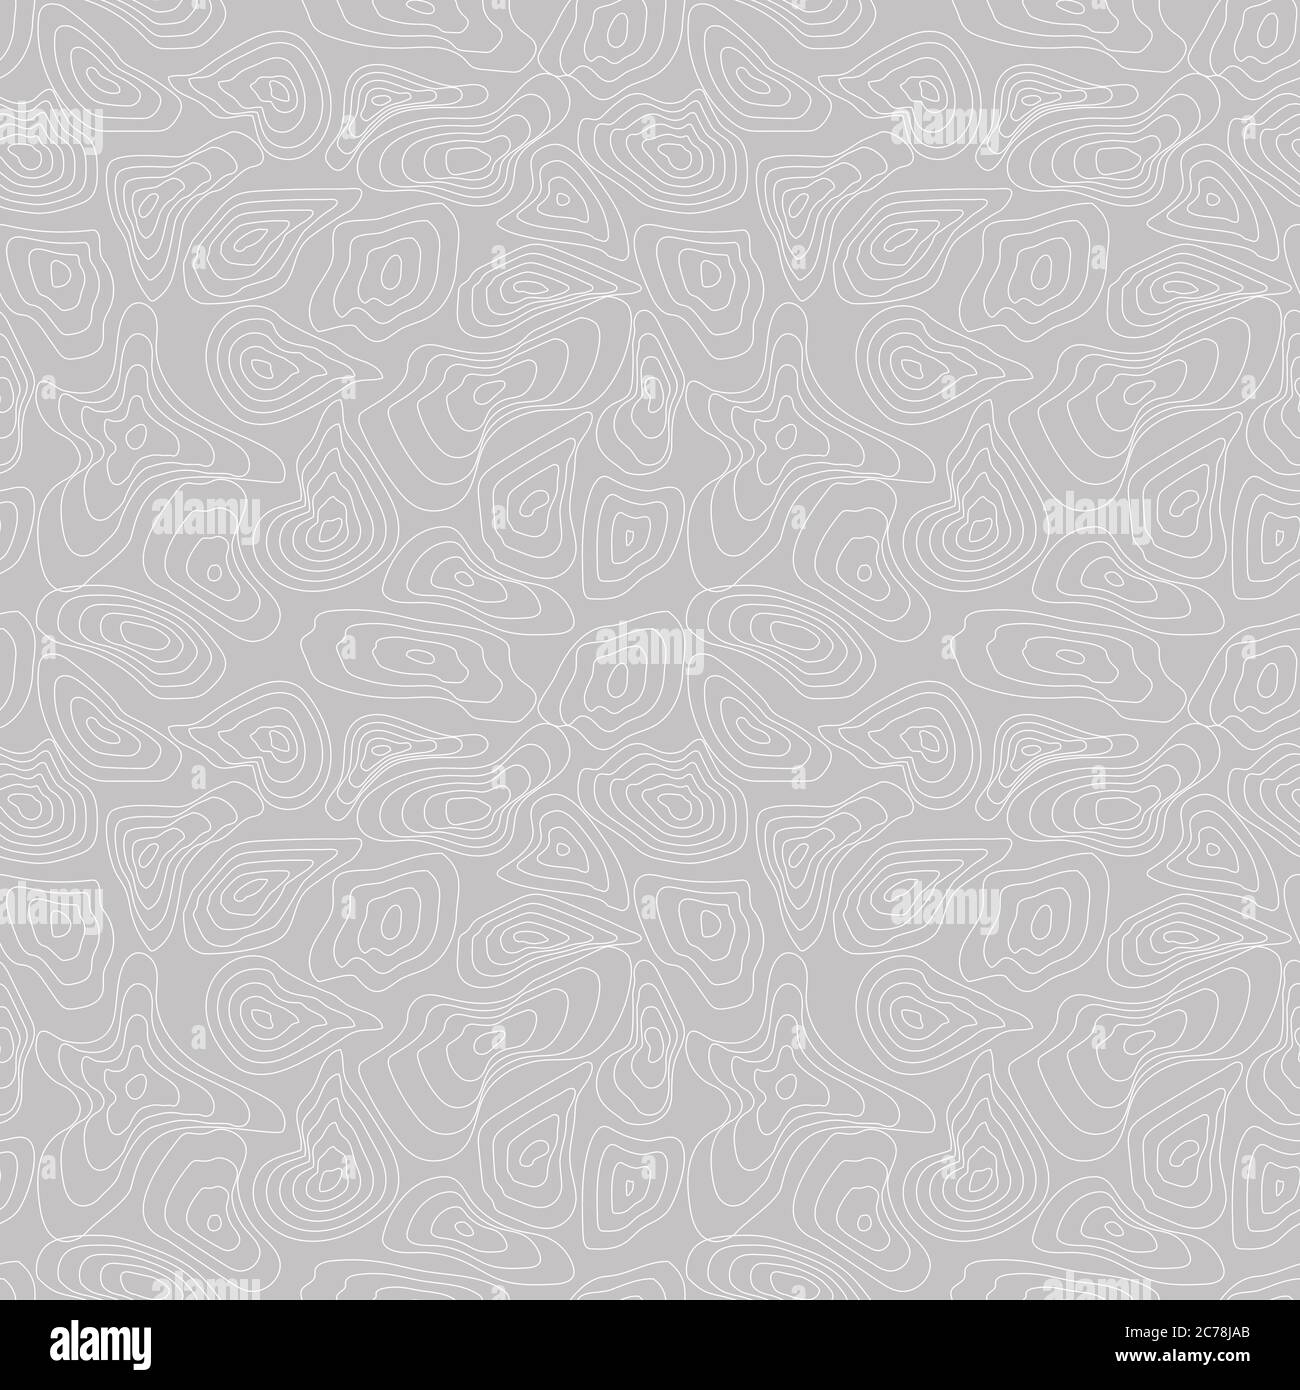 Map vector seamless pattern for bed cover, textile, cushion cover, phone case, home decor, fabric, home furnishings, wallpaper, curtain, tiles, etc. Stock Vector